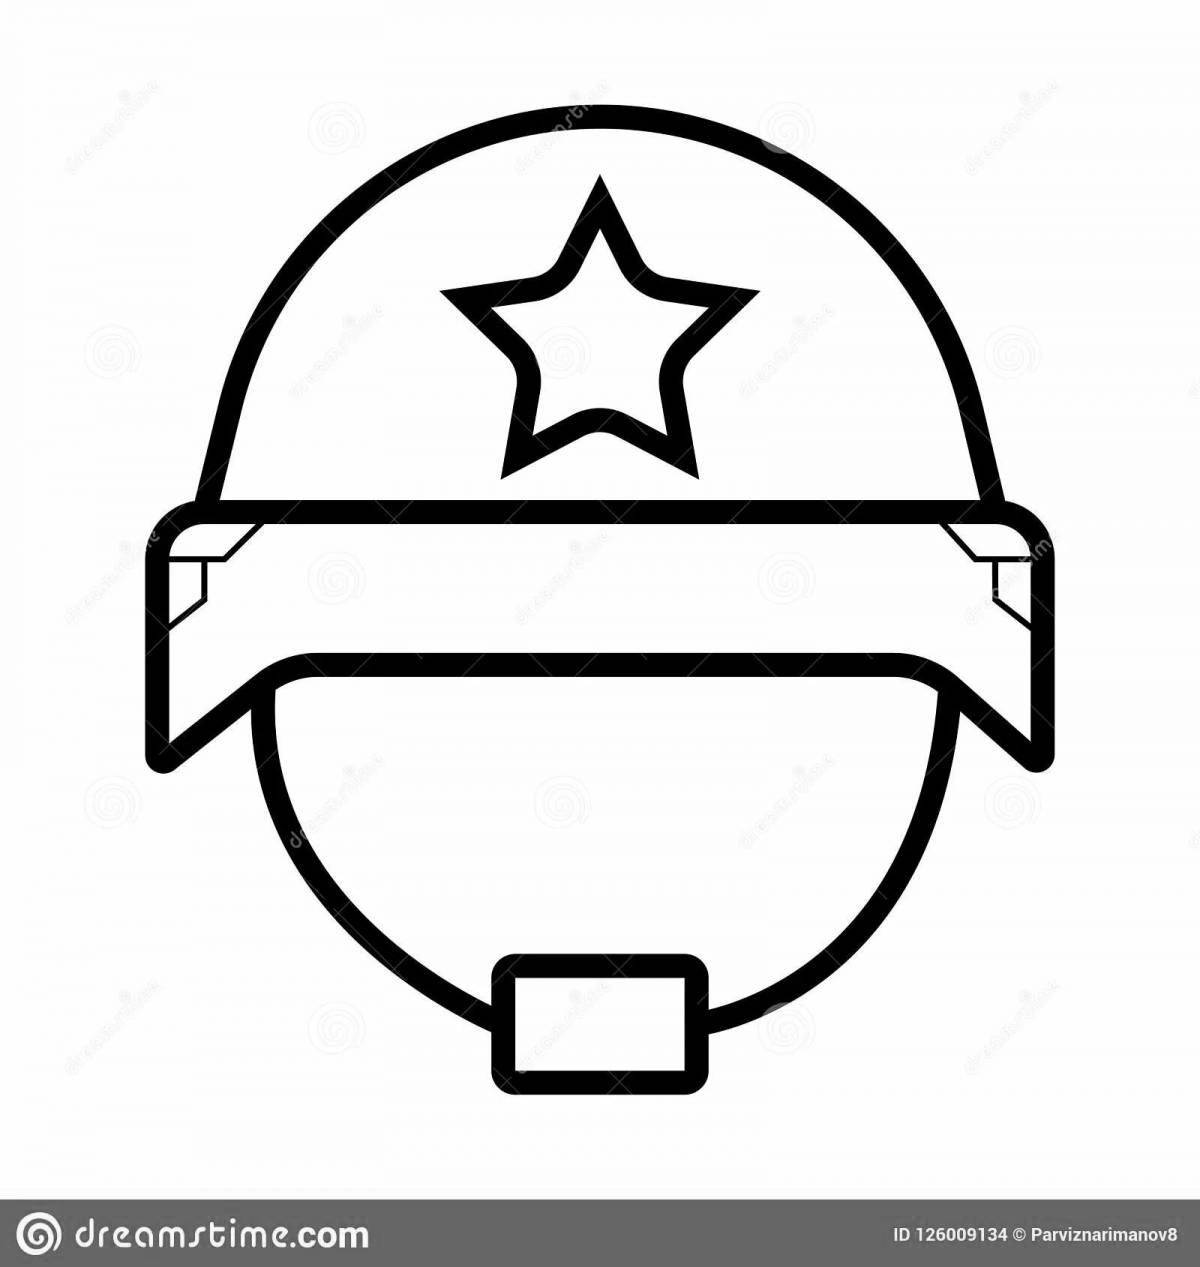 Colourful soldier's helmet coloring page